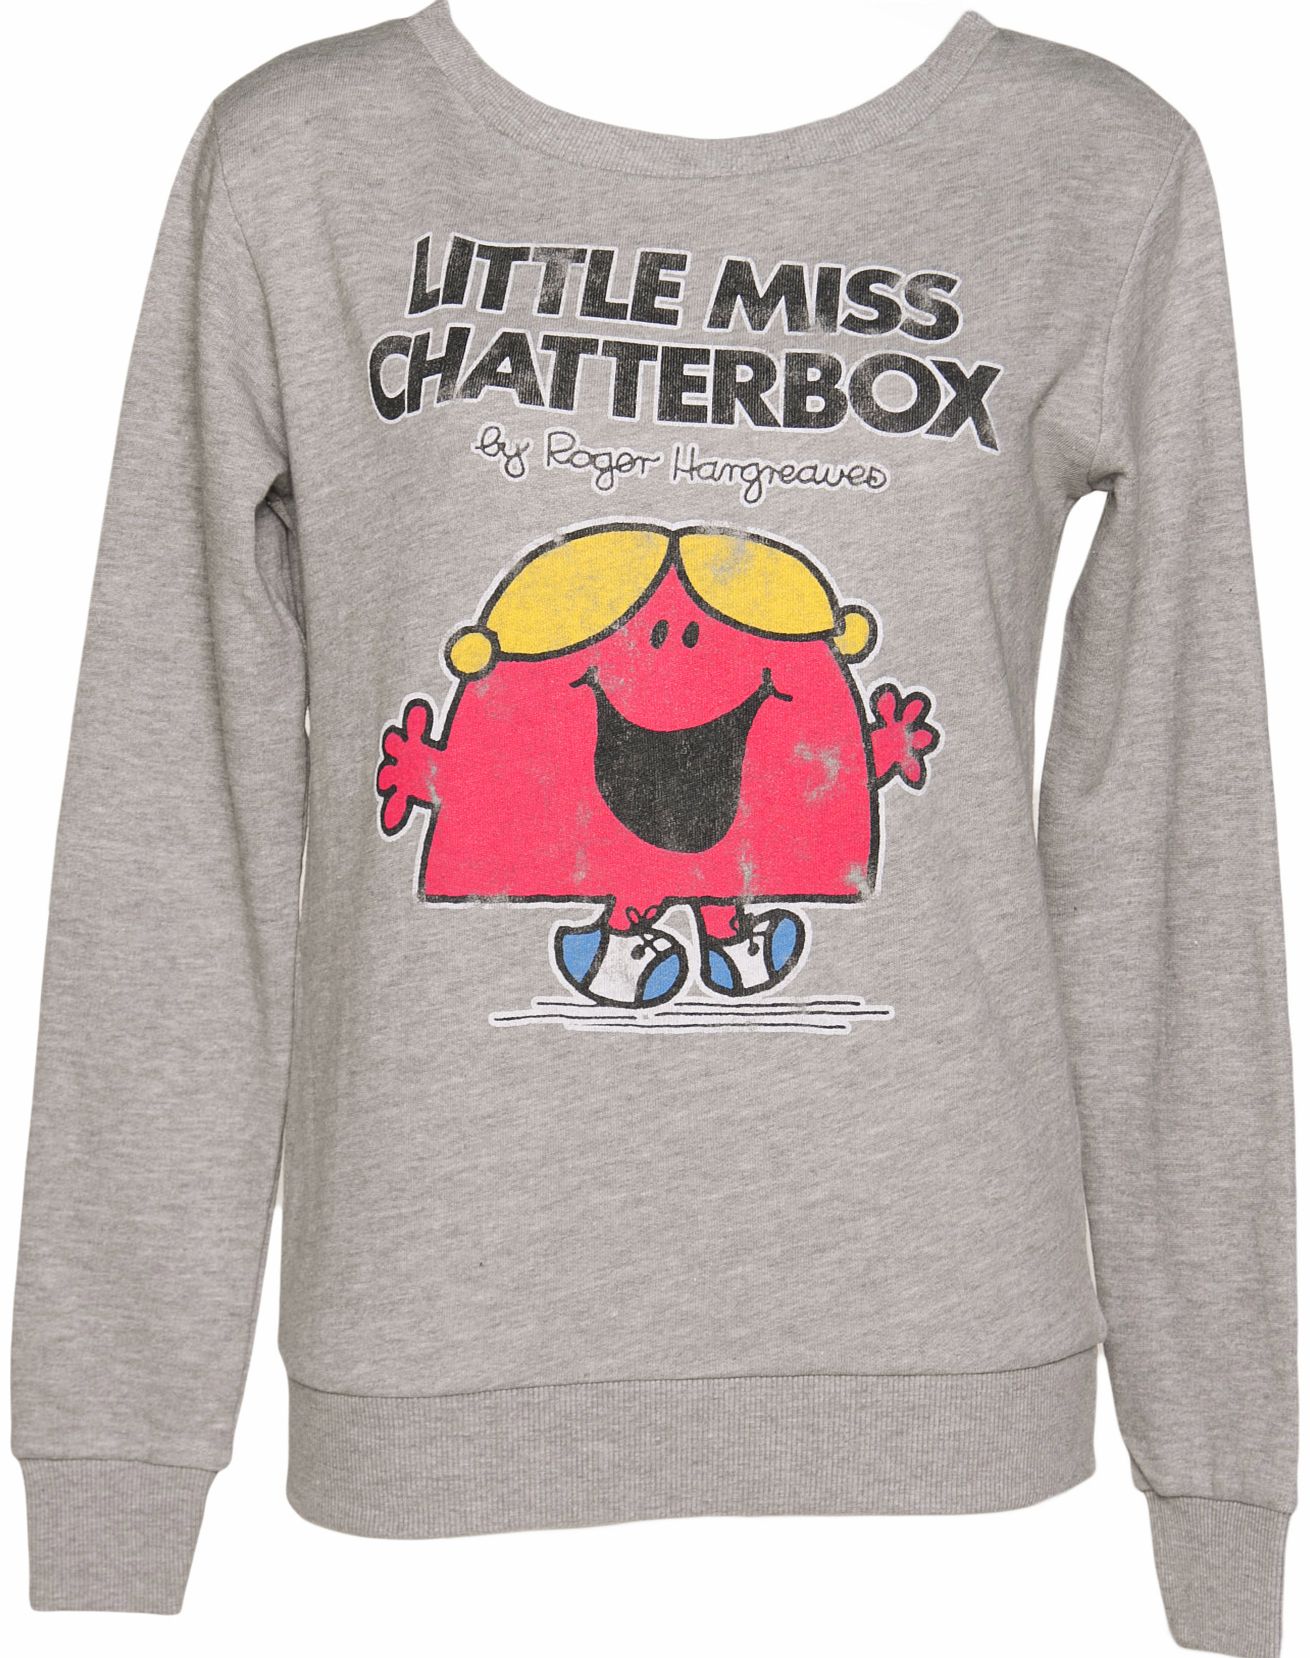 Ladies Little Miss Chatterbox Sweater